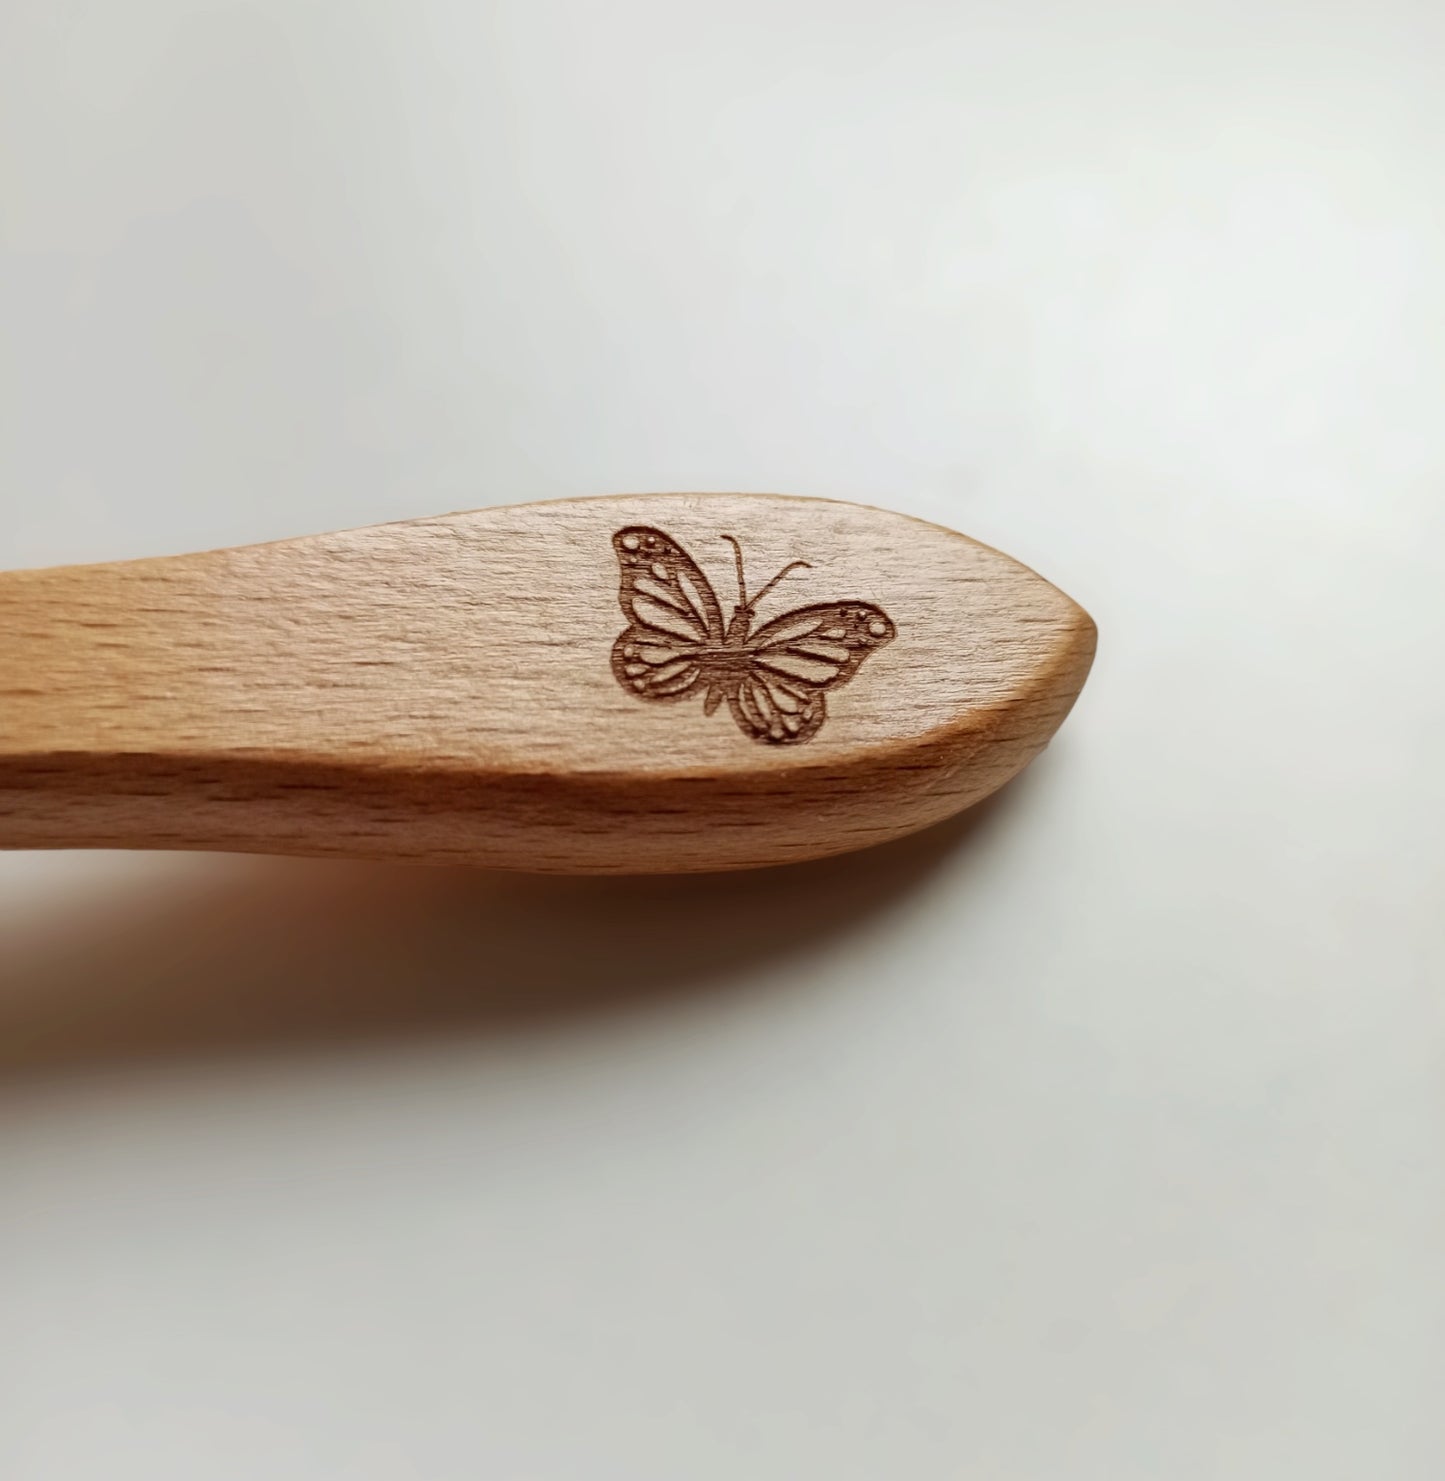 Personalized wooden and silicone cutlery